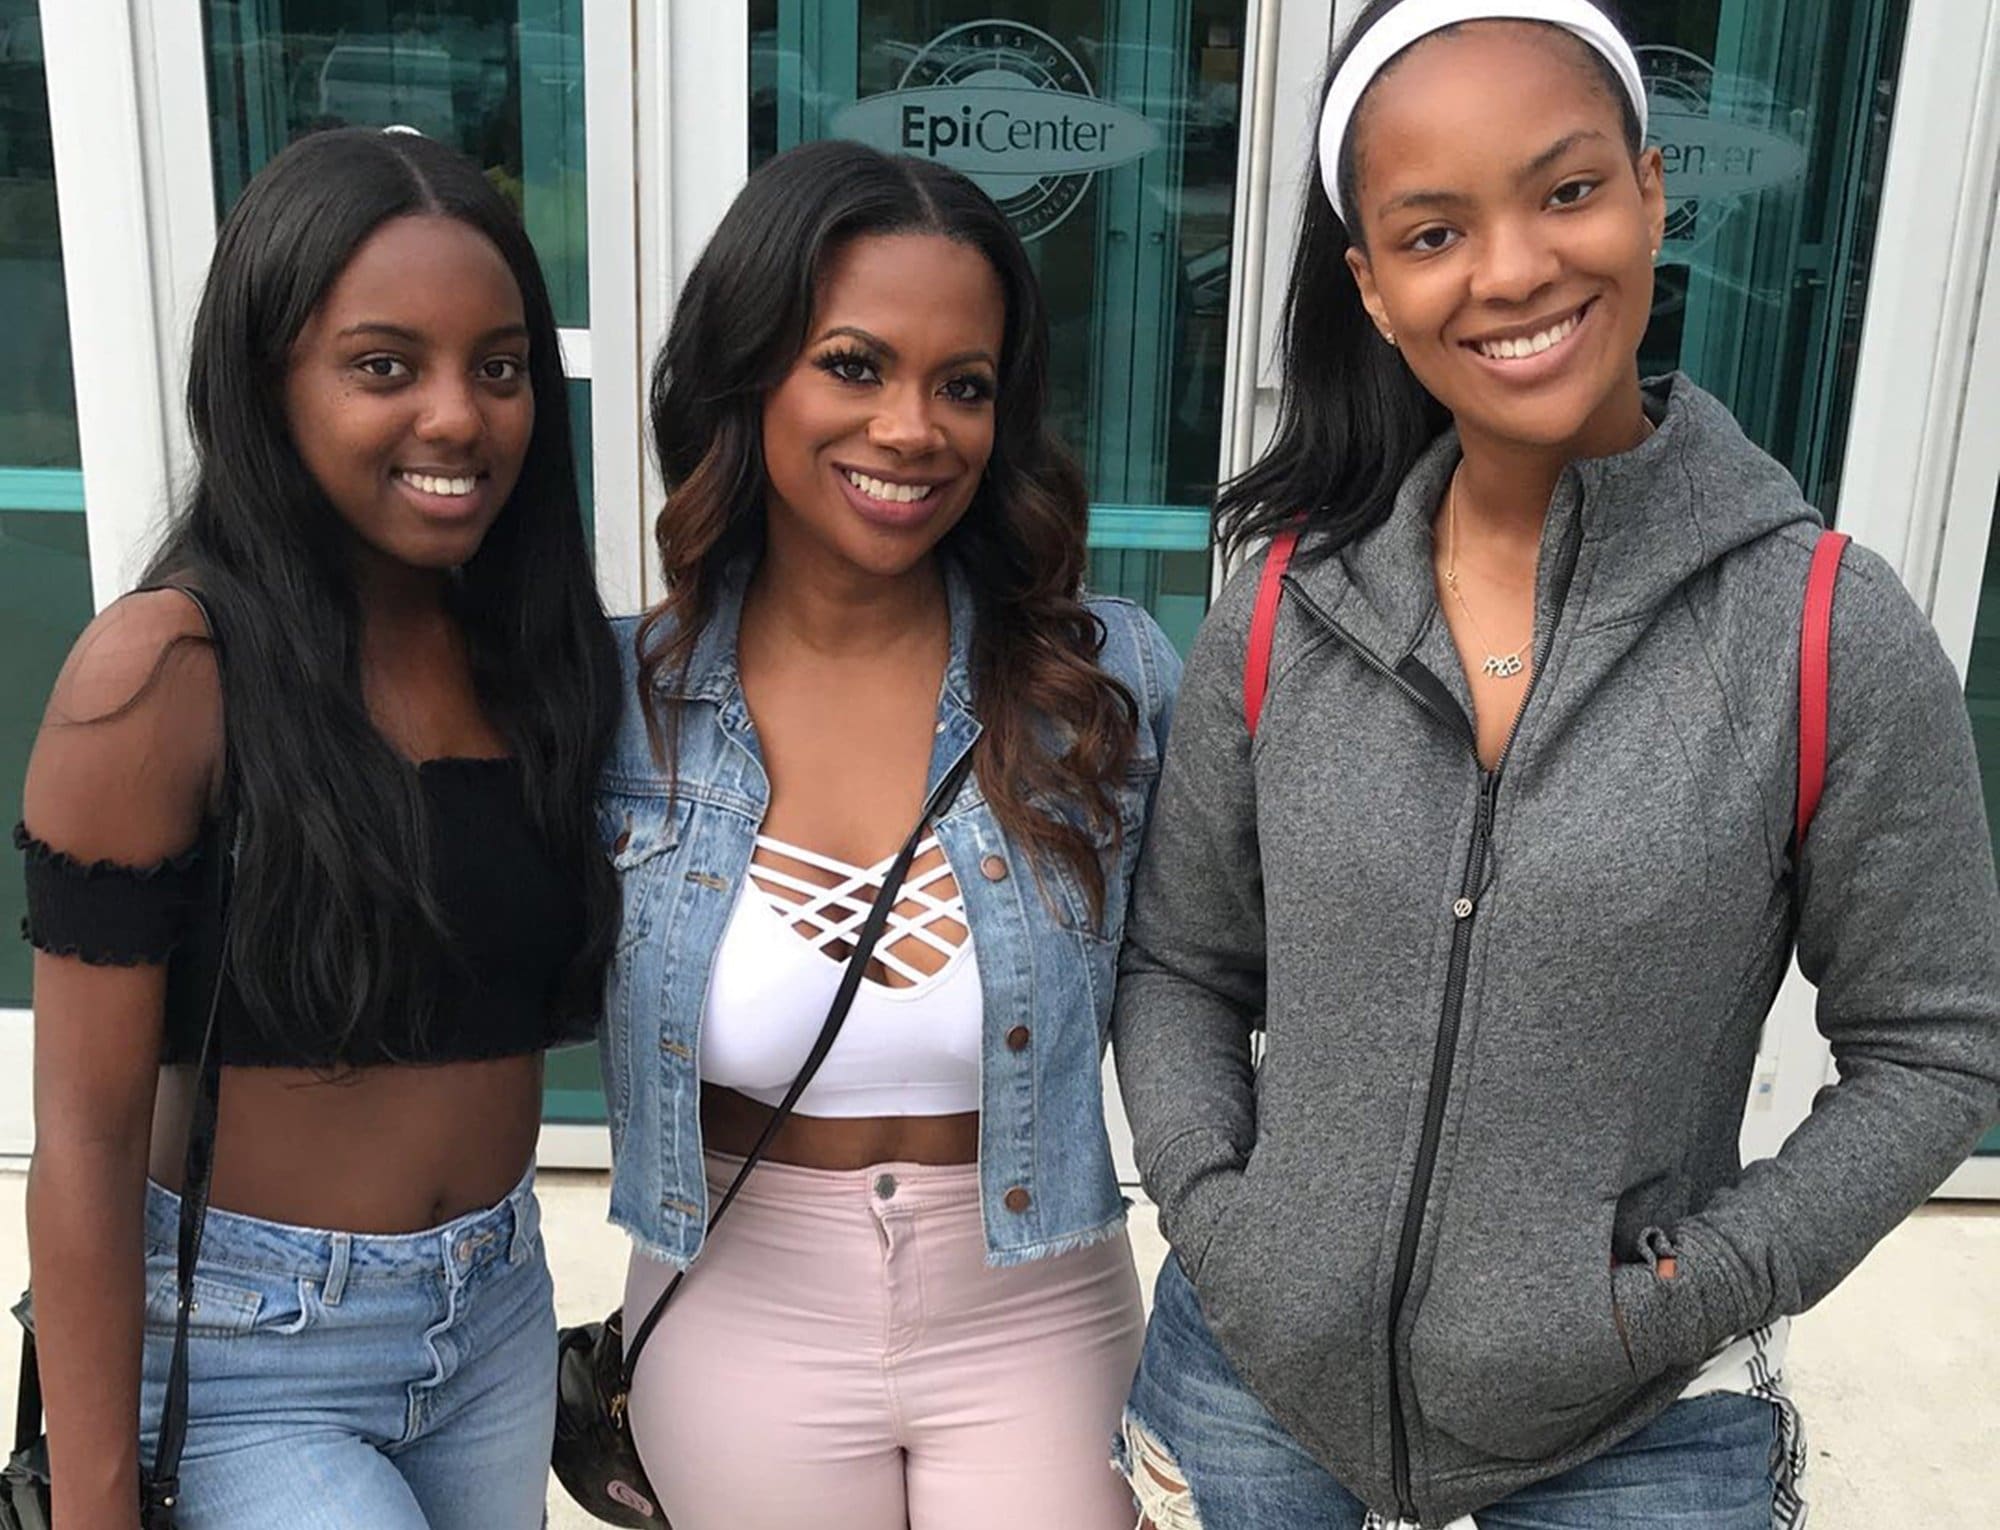 Kandi Burruss' Easter Family Card Blows Fans Away - Her And Todd Tucker's Daughters, Riley Burruss And Kaela Tucker Are Glowing!